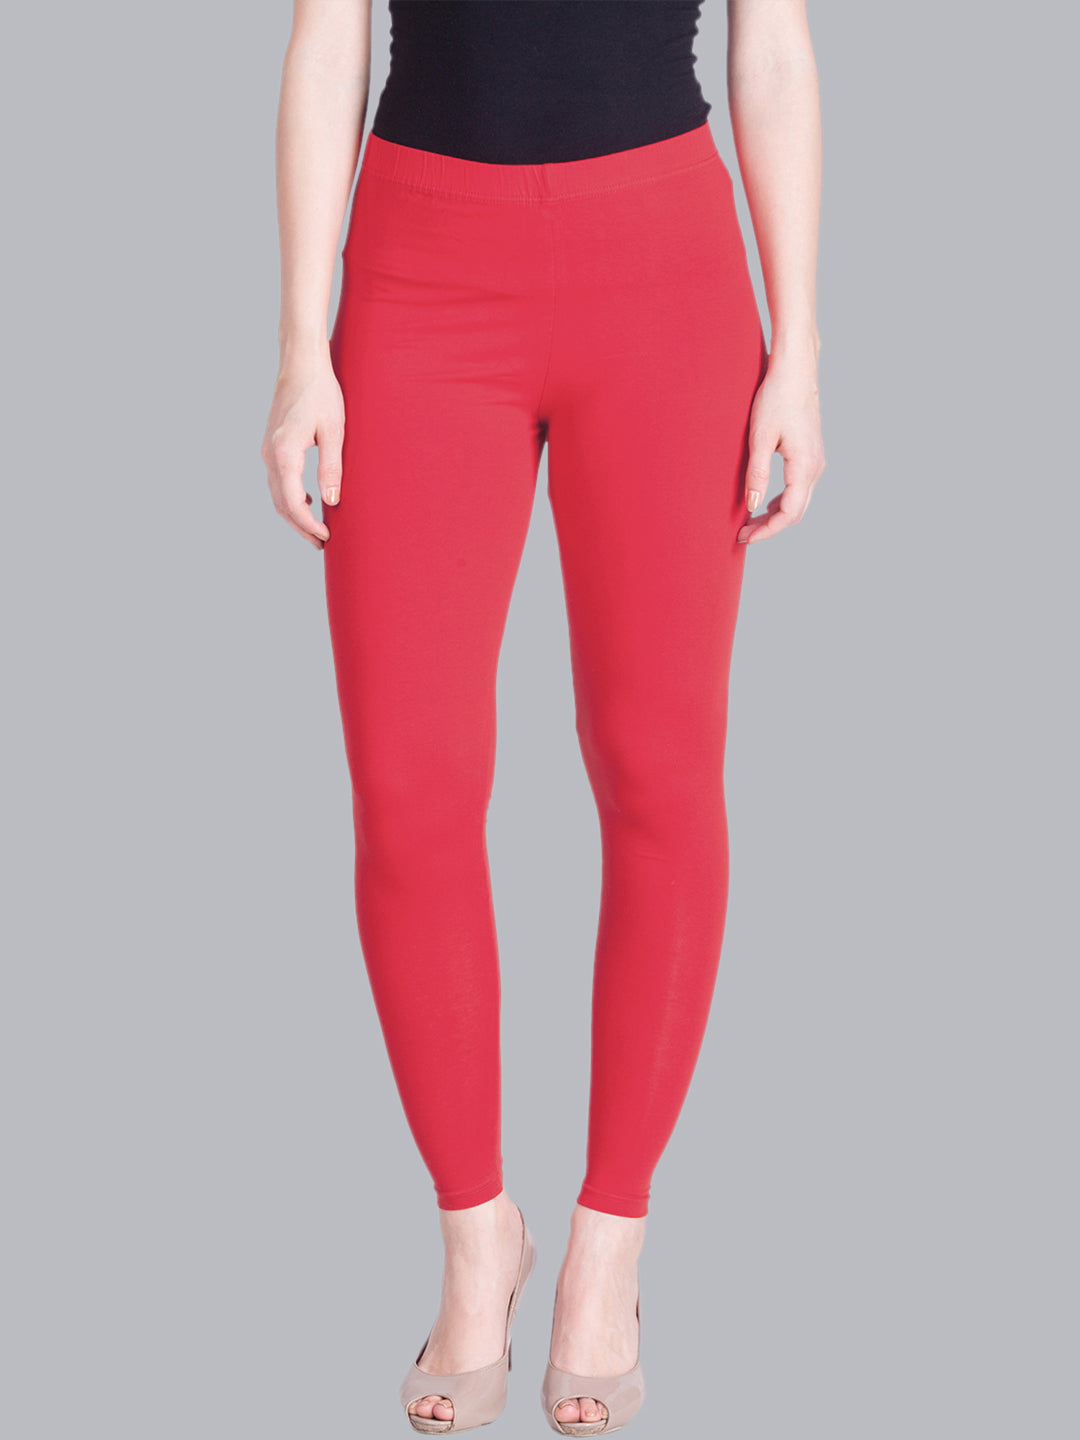 Plain Red Ladies Ankle Length Cotton Leggings, Size: 28 To 36 at